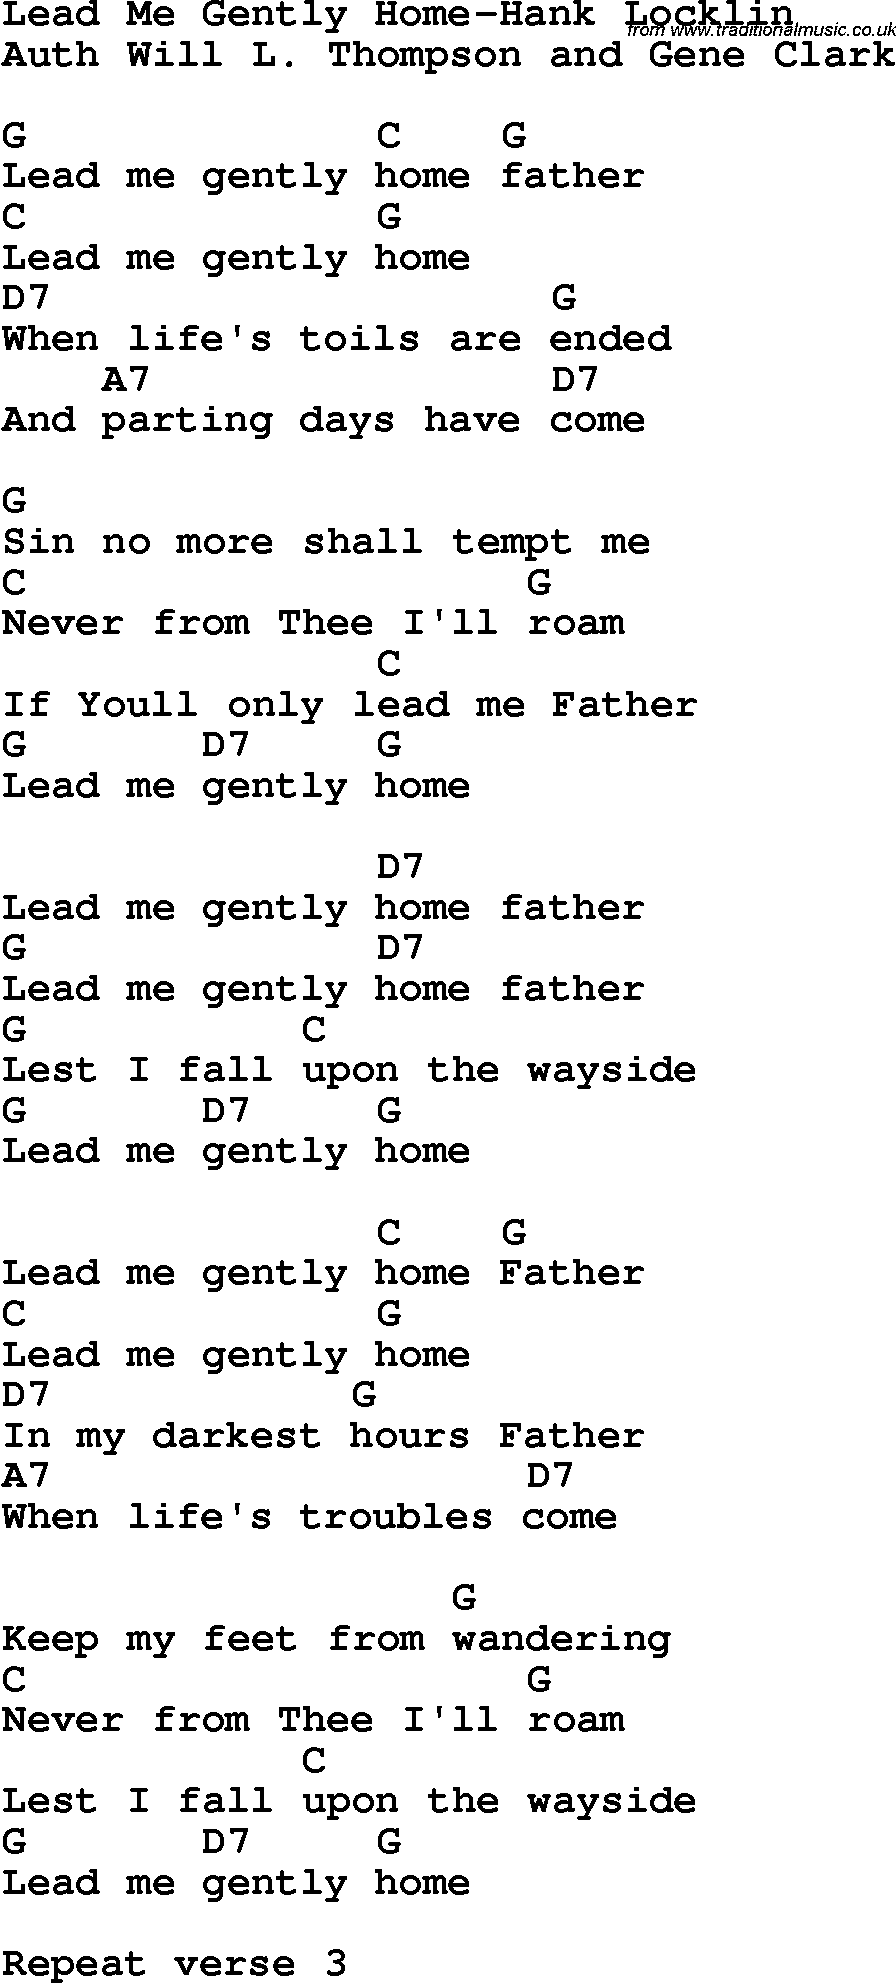 Country, Southern and Bluegrass Gospel Song Lead Me Gently Home-Hank Locklin lyrics and chords